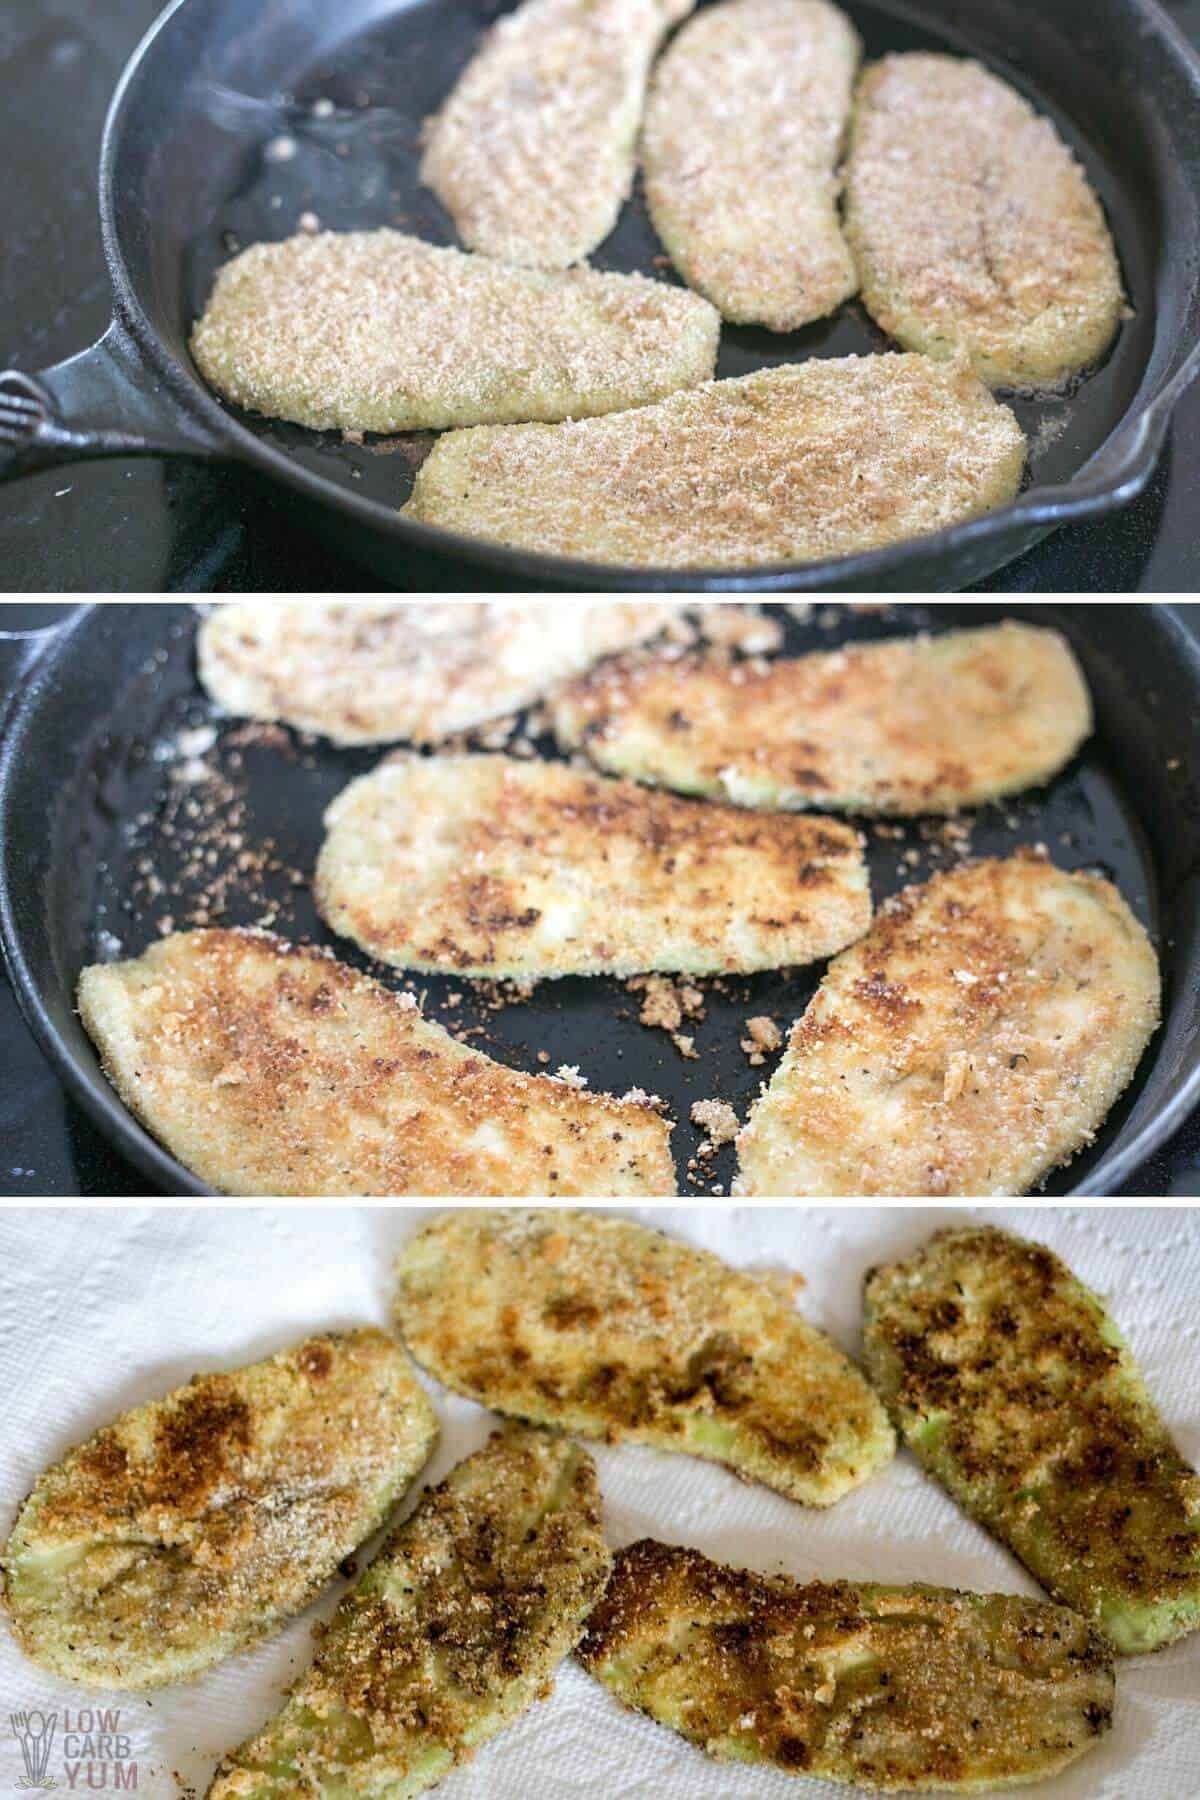 frying the breaded eggplant slices in skillet